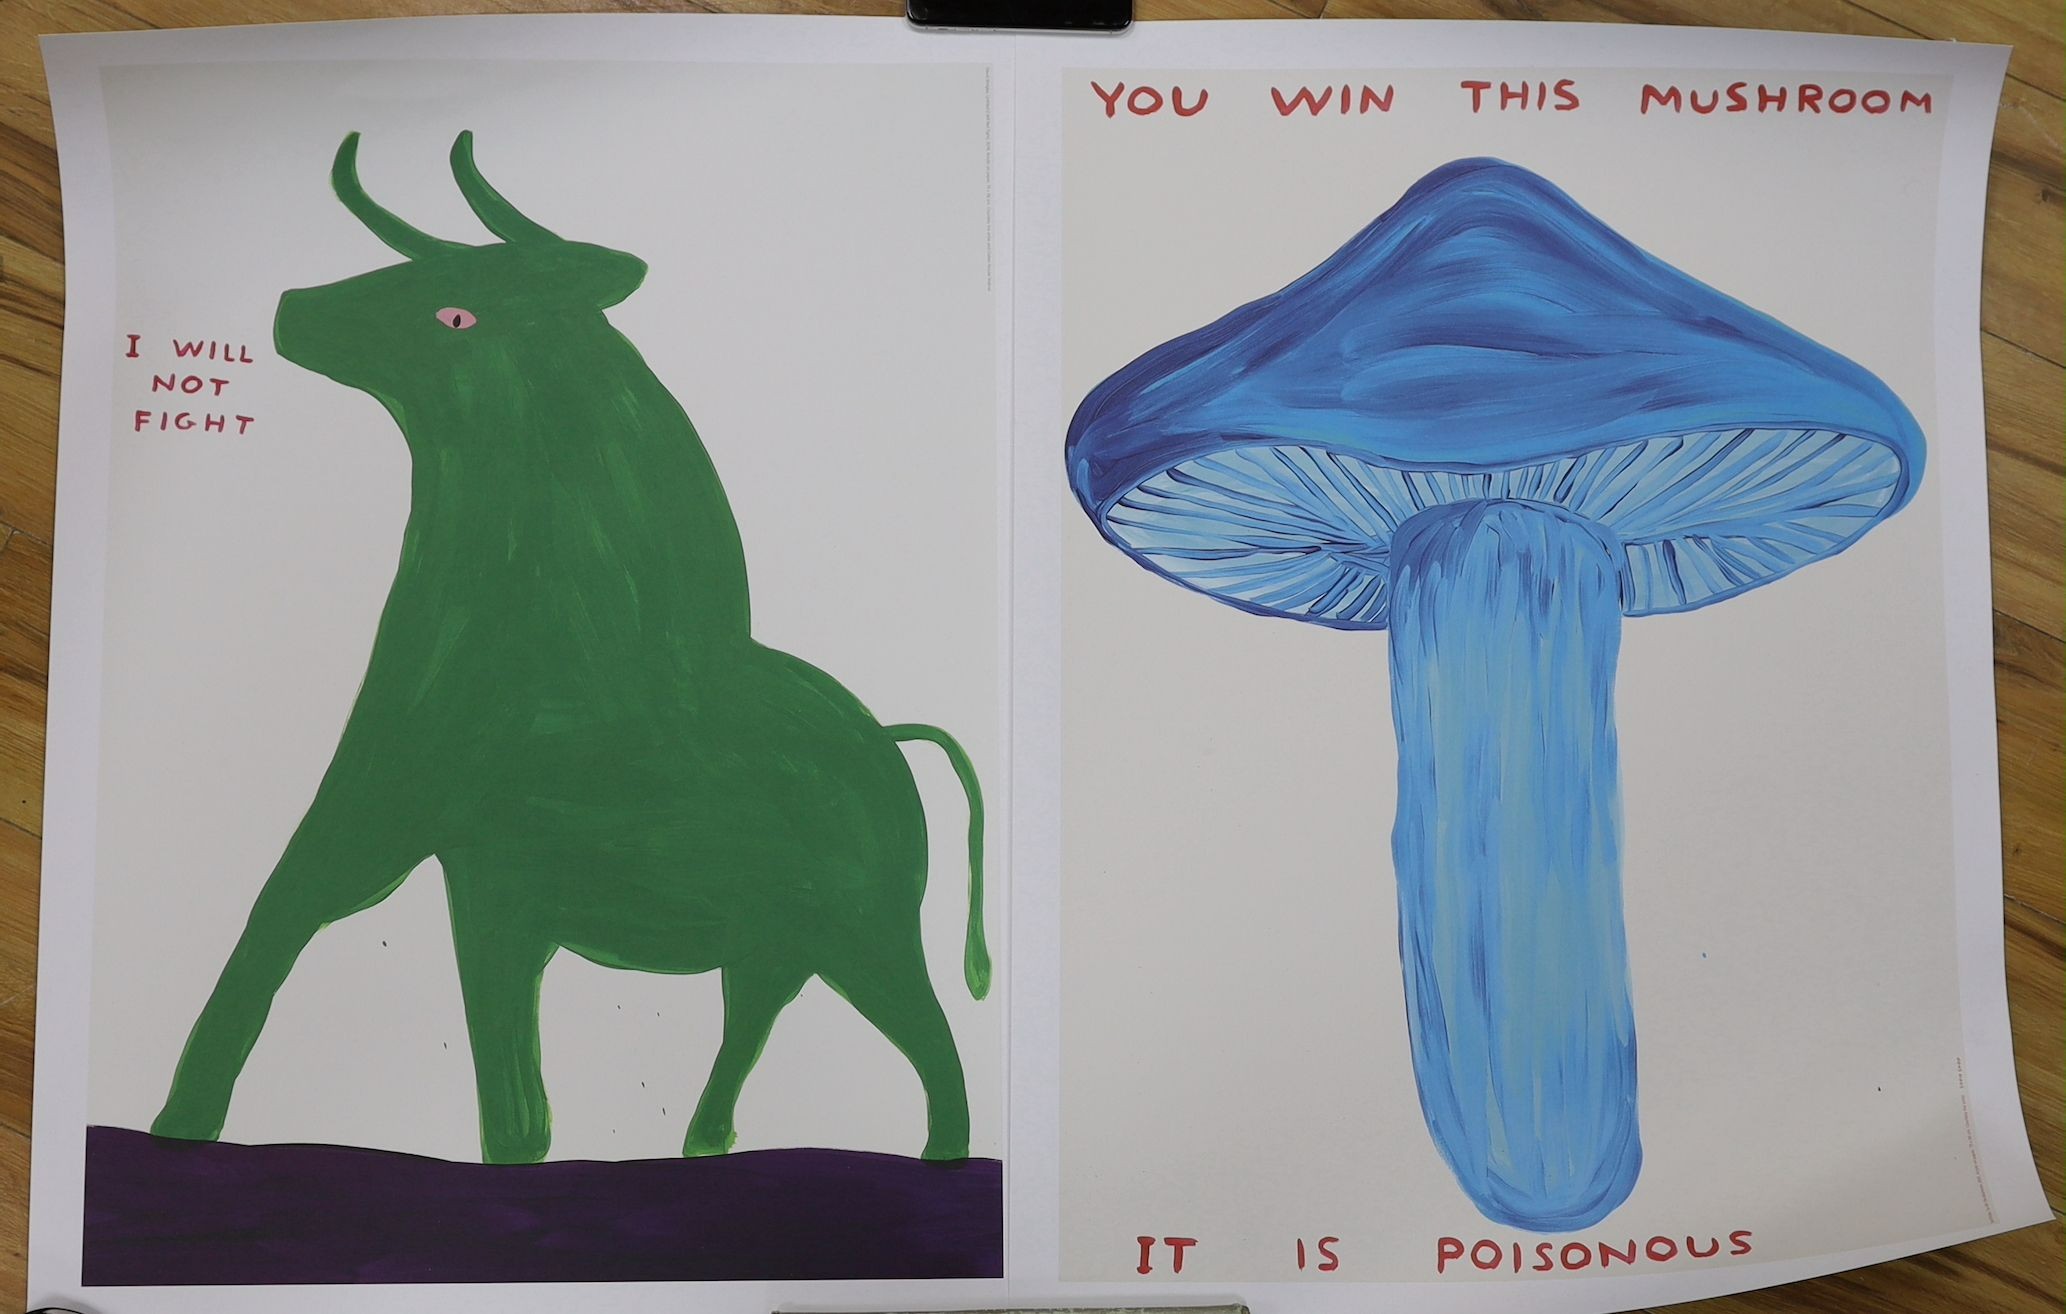 David Shrigley (1968-), two colour prints, 'Untitled (I Will Not Fight)' and 'You Win This Mushroom', 81 x 60cm, unframed